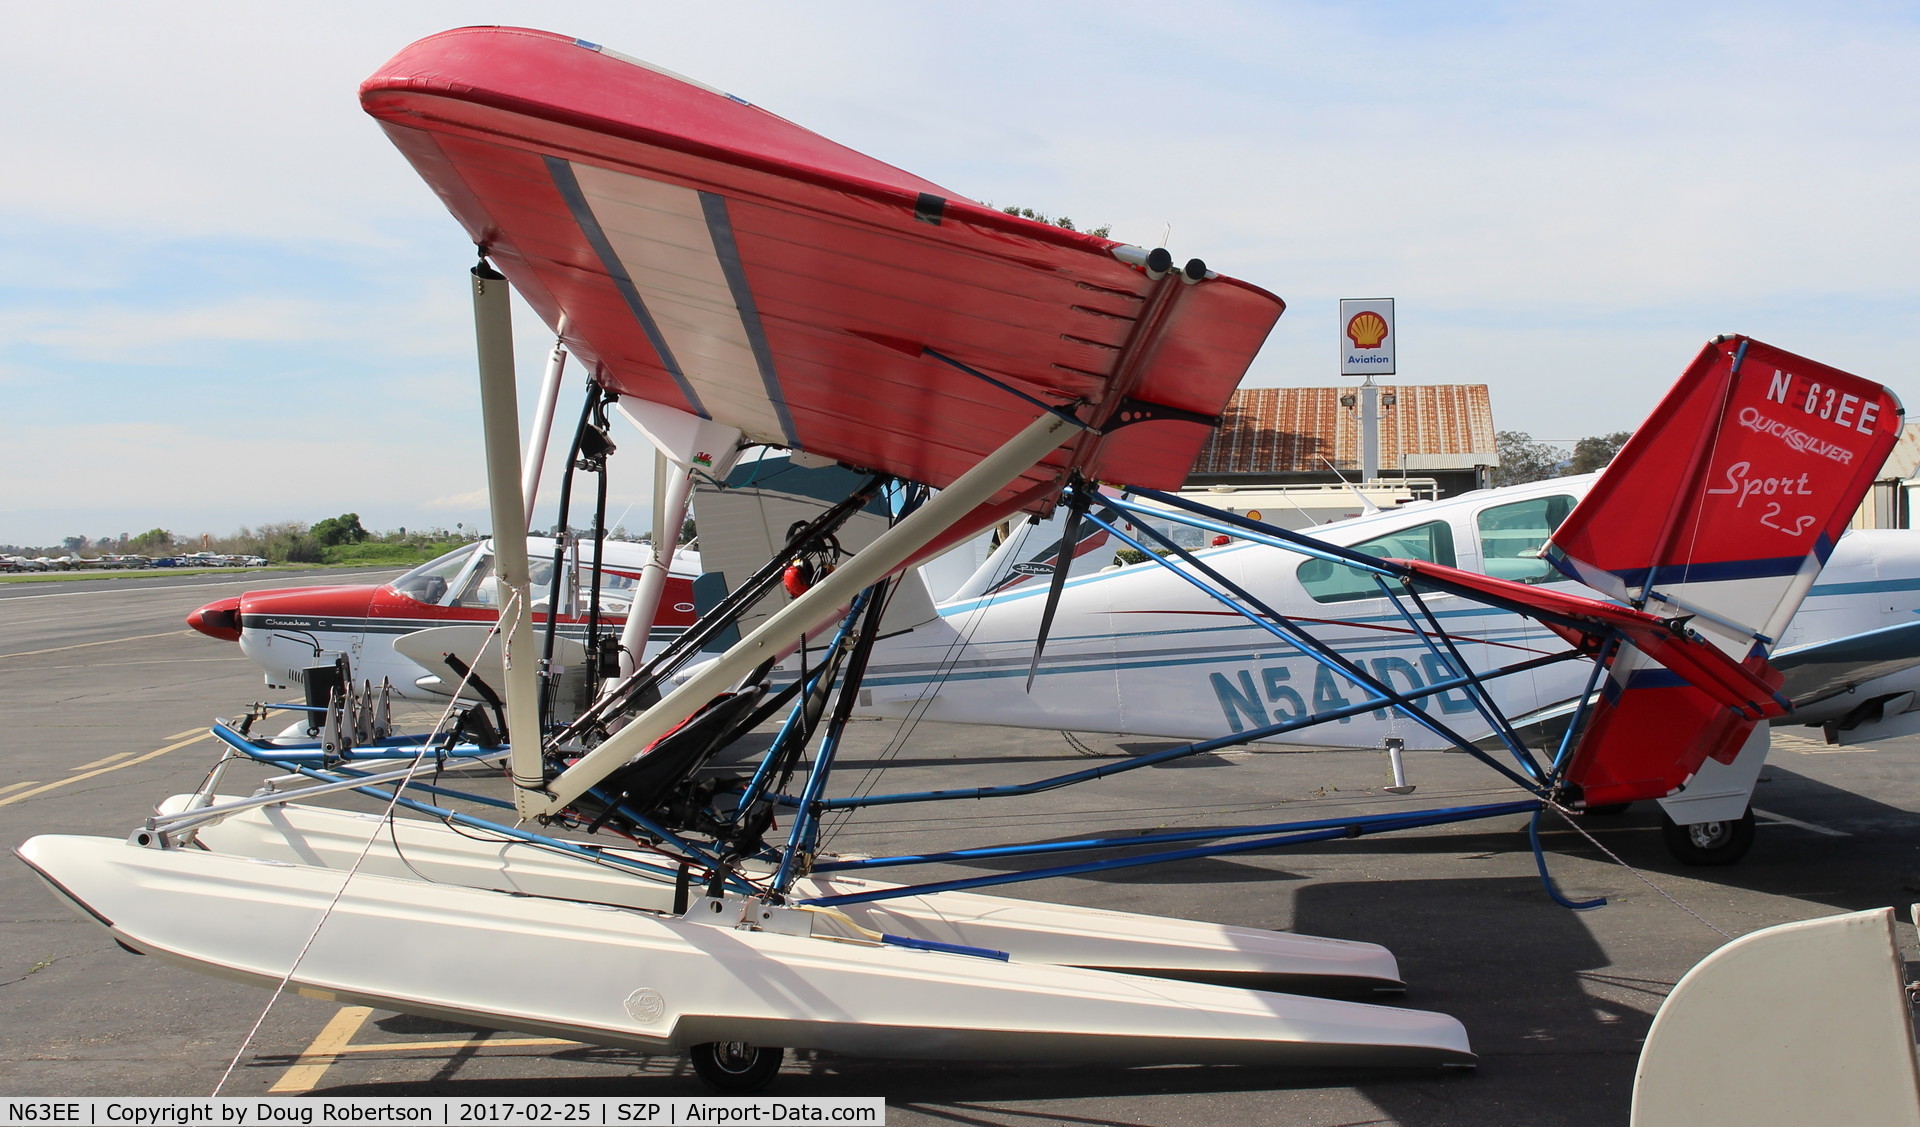 N63EE, Quicksilver Sport 2S C/N 0001, 1999 Quicksilver SPORT 2.S Amphibian, Rotax 582ULDCDI two-stroke 65 Hp pusher. Experimental class ultralight. Note Construction Number.